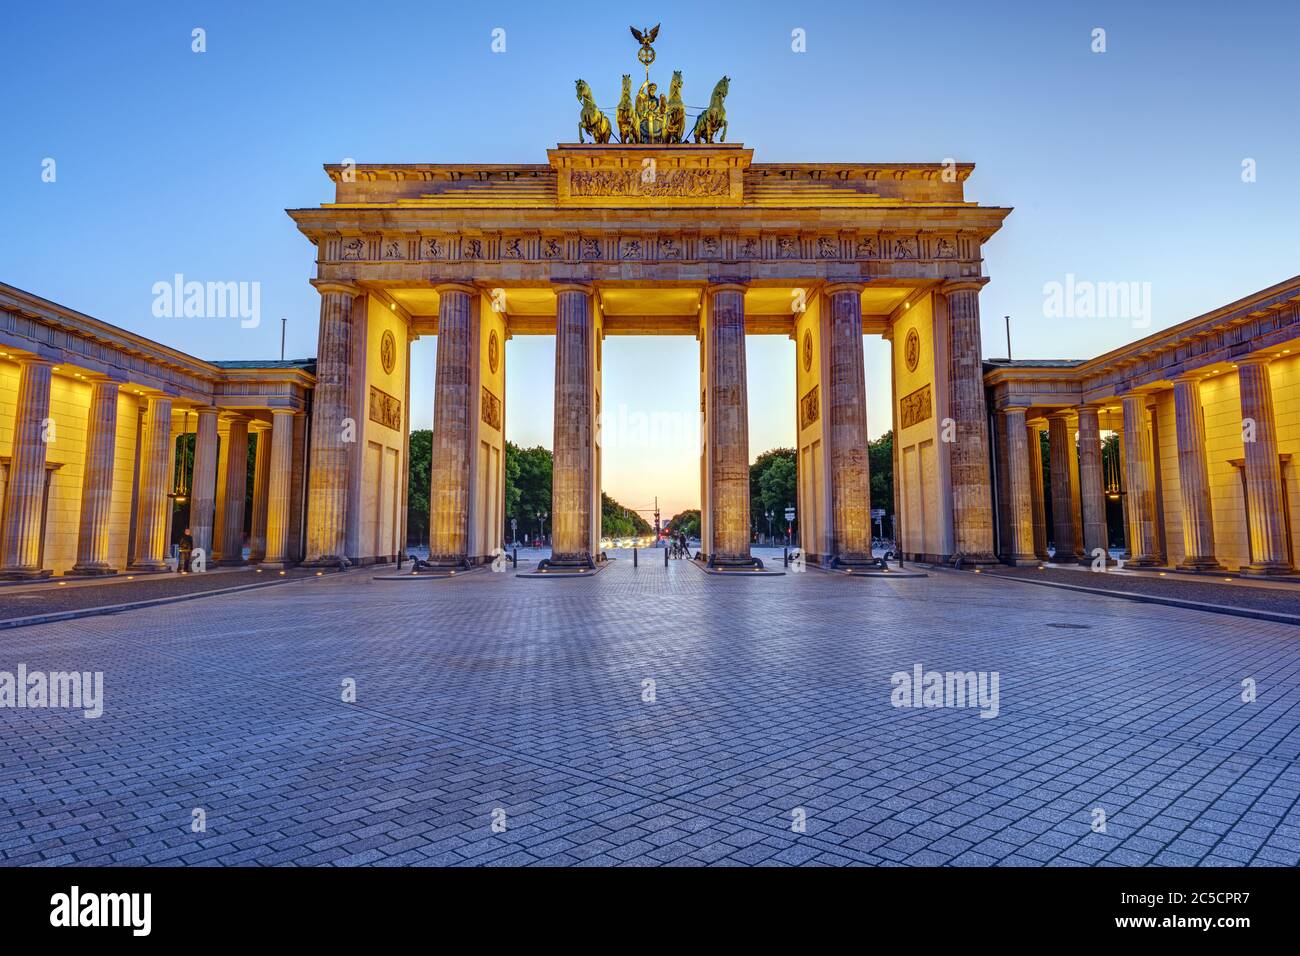 The illuminated Brandenburg Gate in Berlin at twilight with no people Stock Photo